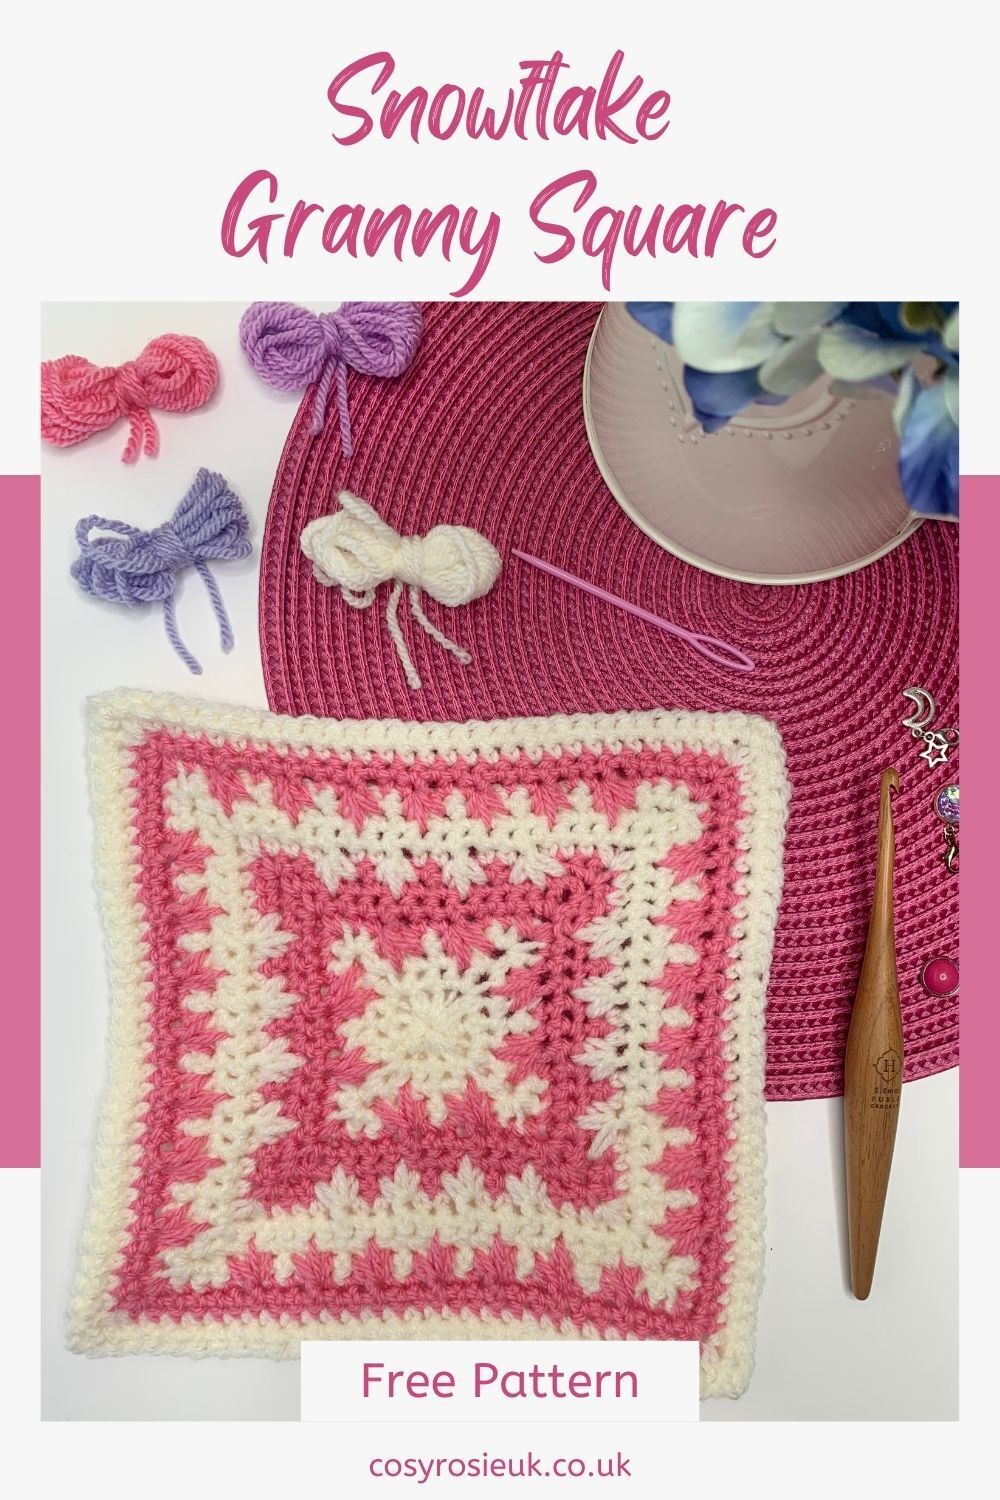 Snowflake Granny Square Pattern with video tutorial